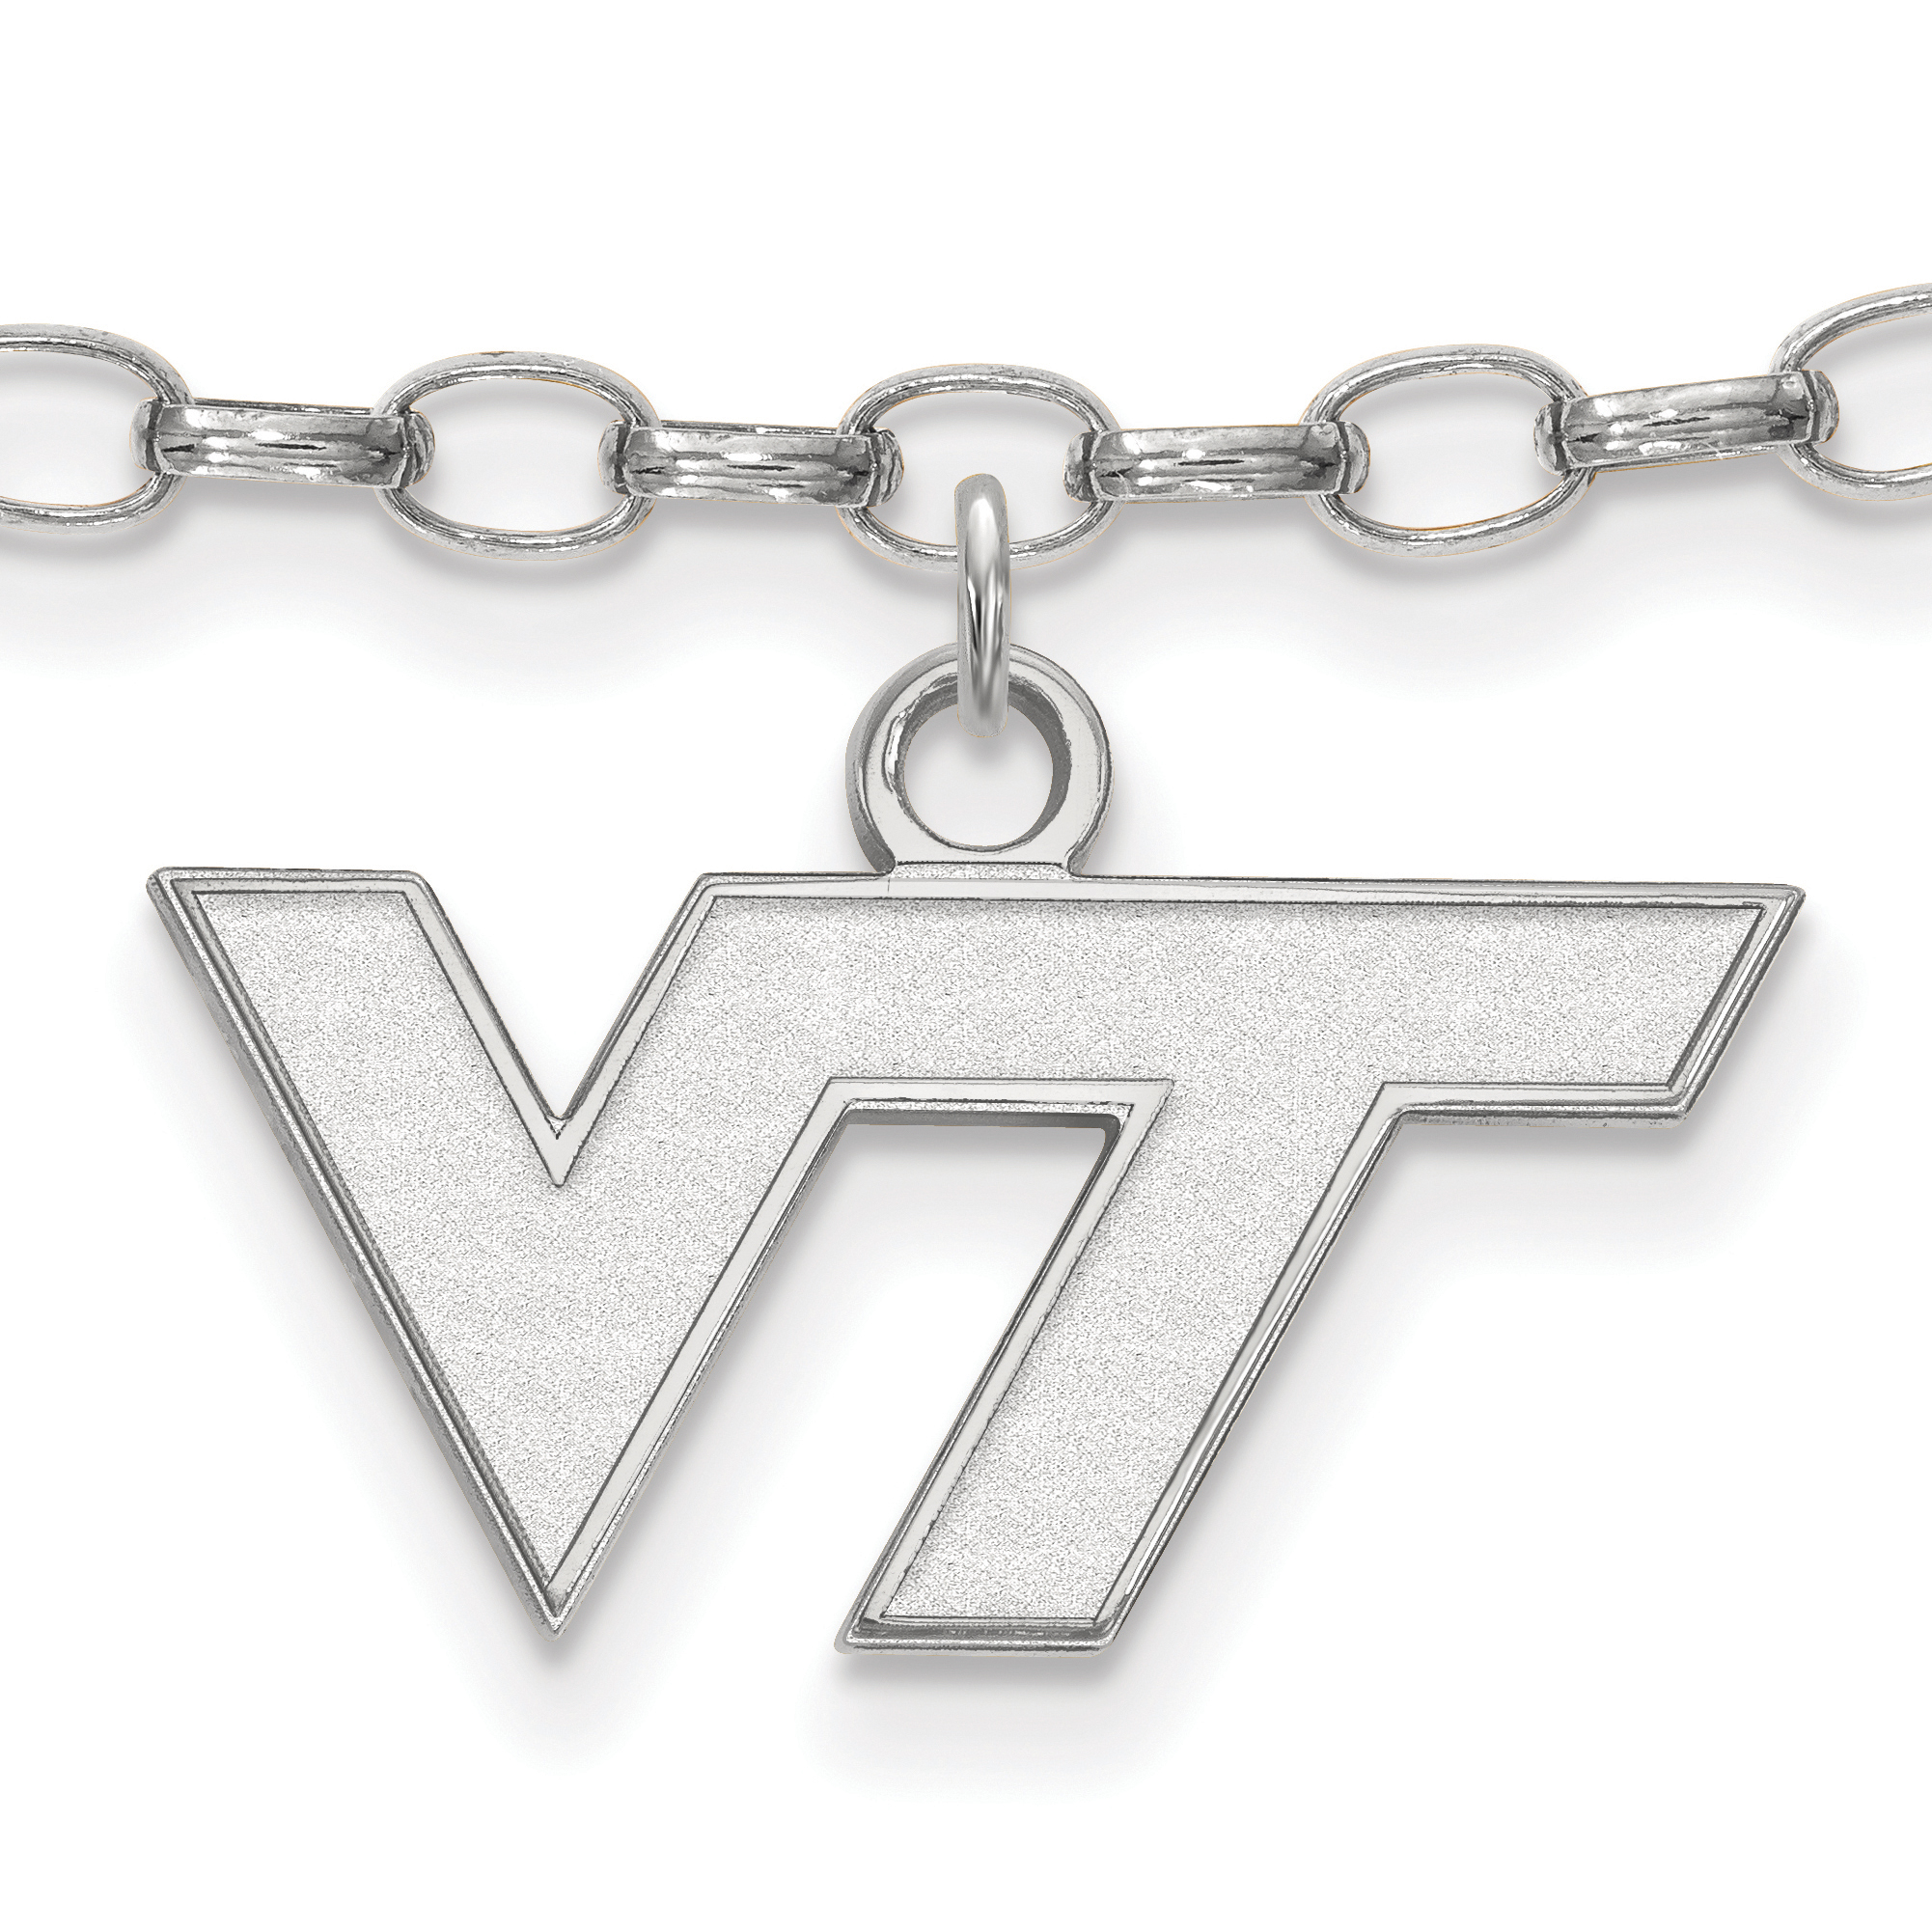 LogoArt Sterling Silver Rhodium-plated Virginia Tech Anklet - image 1 of 5